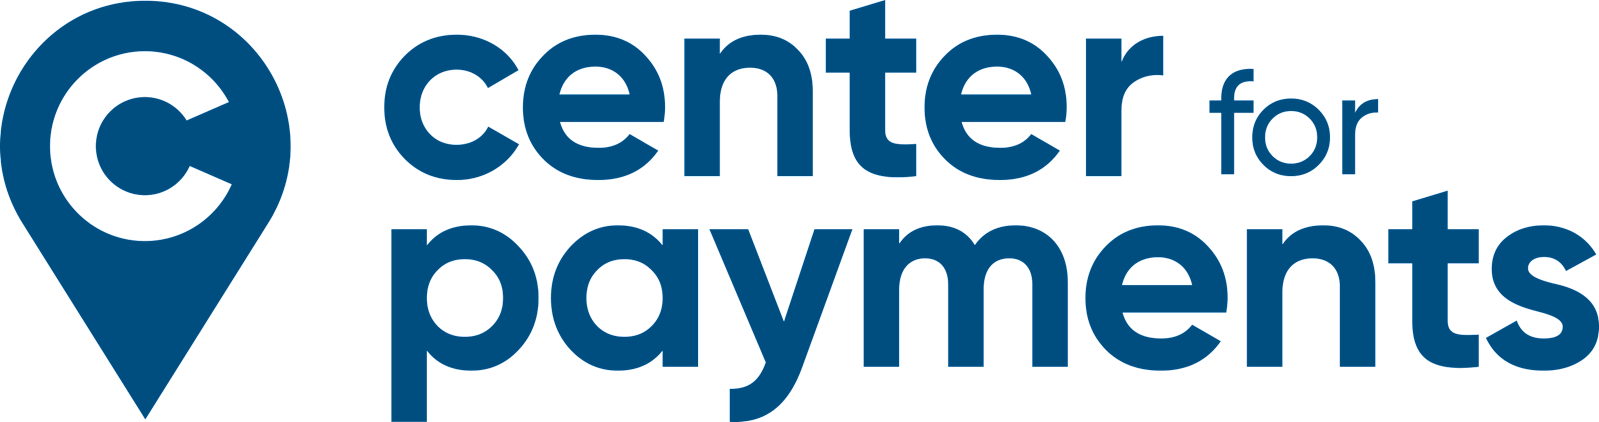 Center for Payments